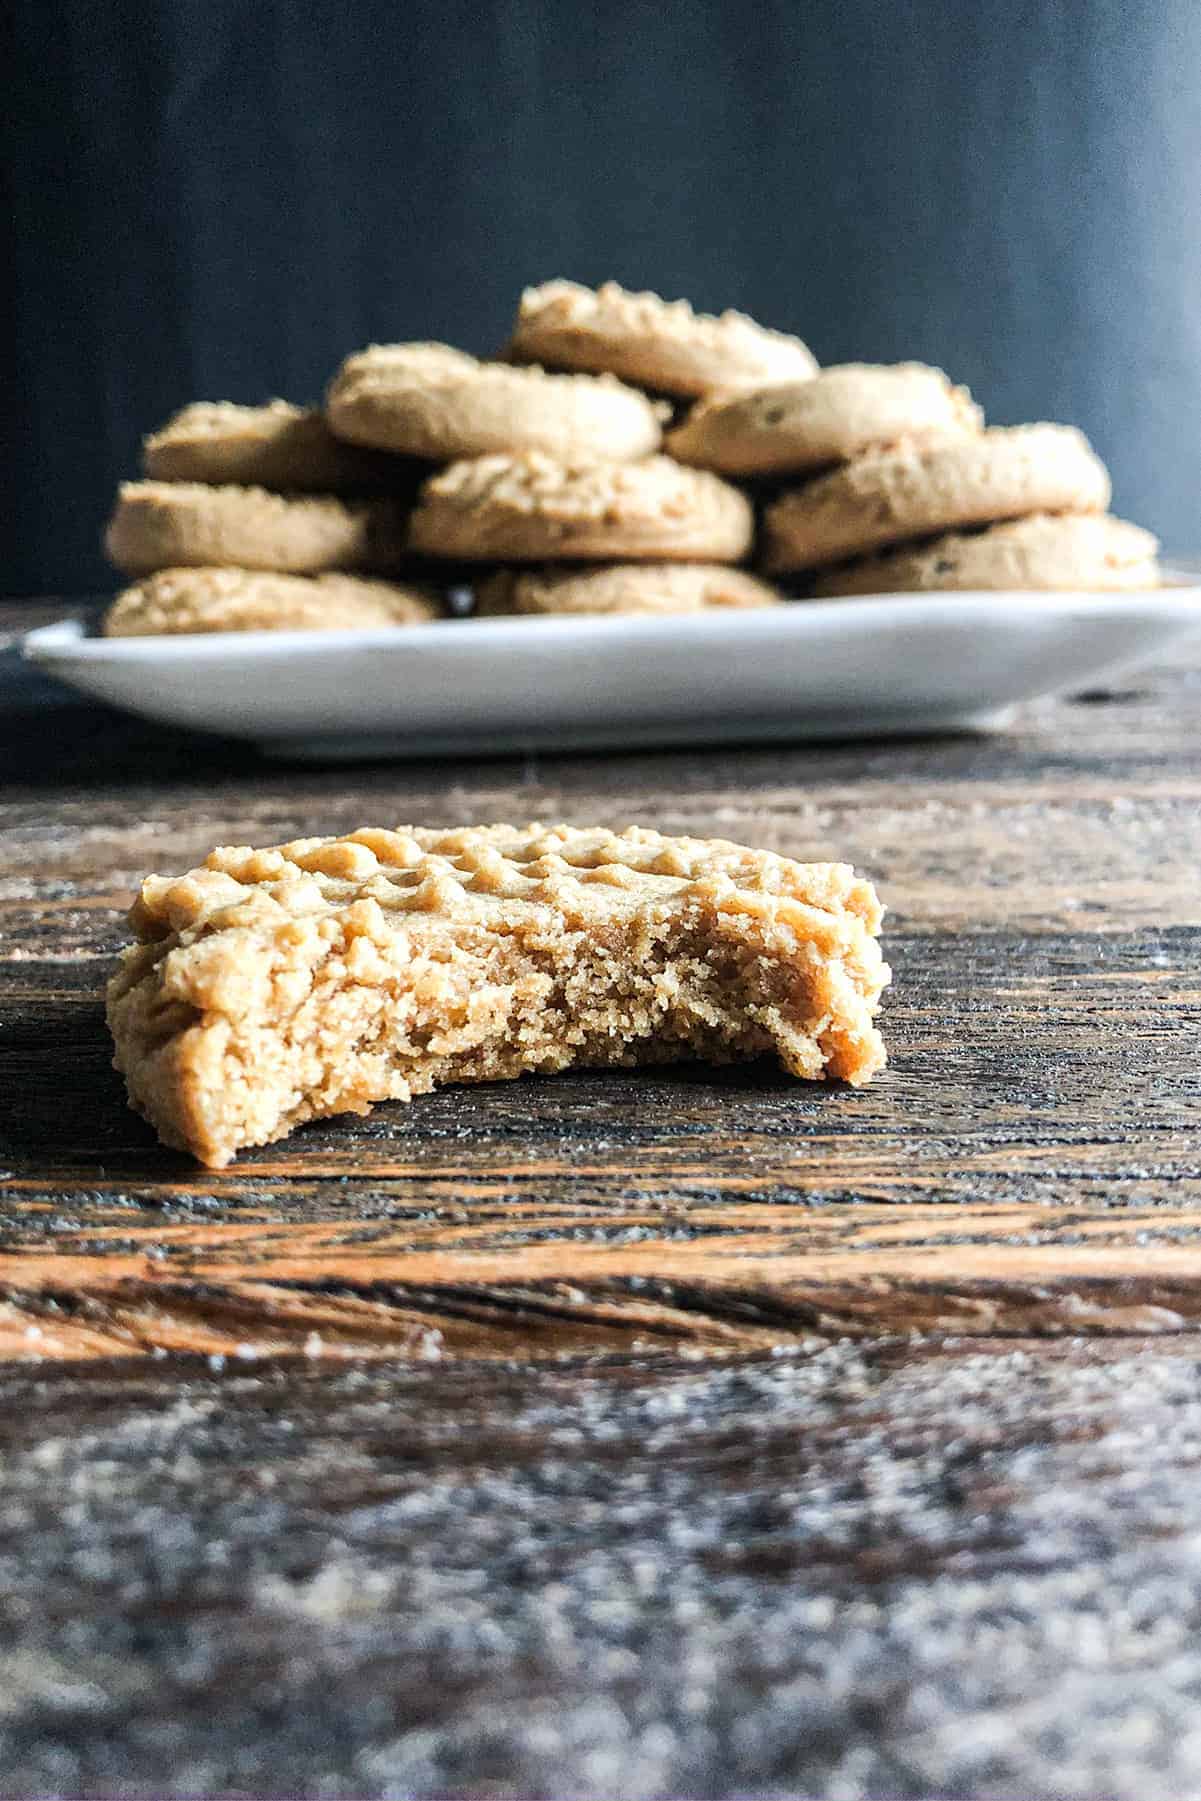 Peanut butter cookie with a bite out.